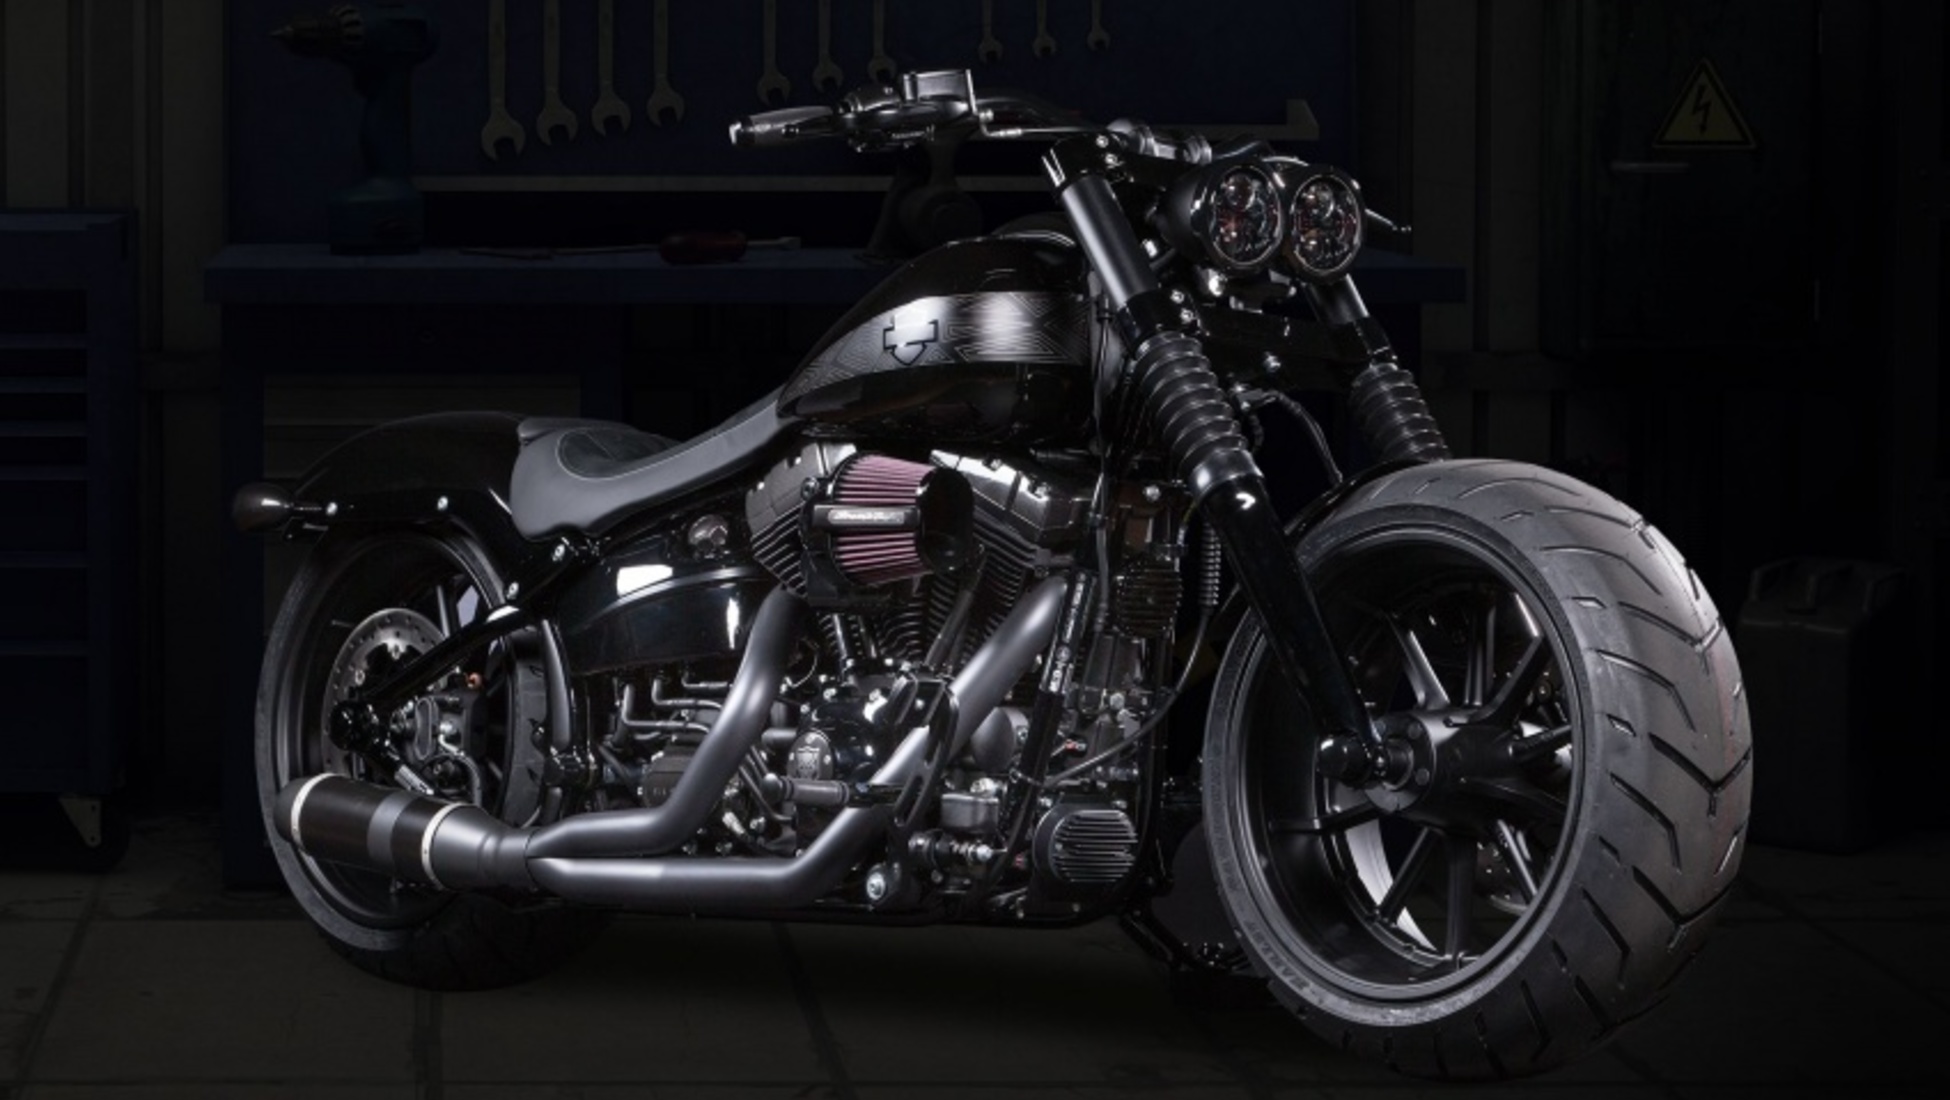 called the Black Panther. and of course, even Harley Davidson had a concept...